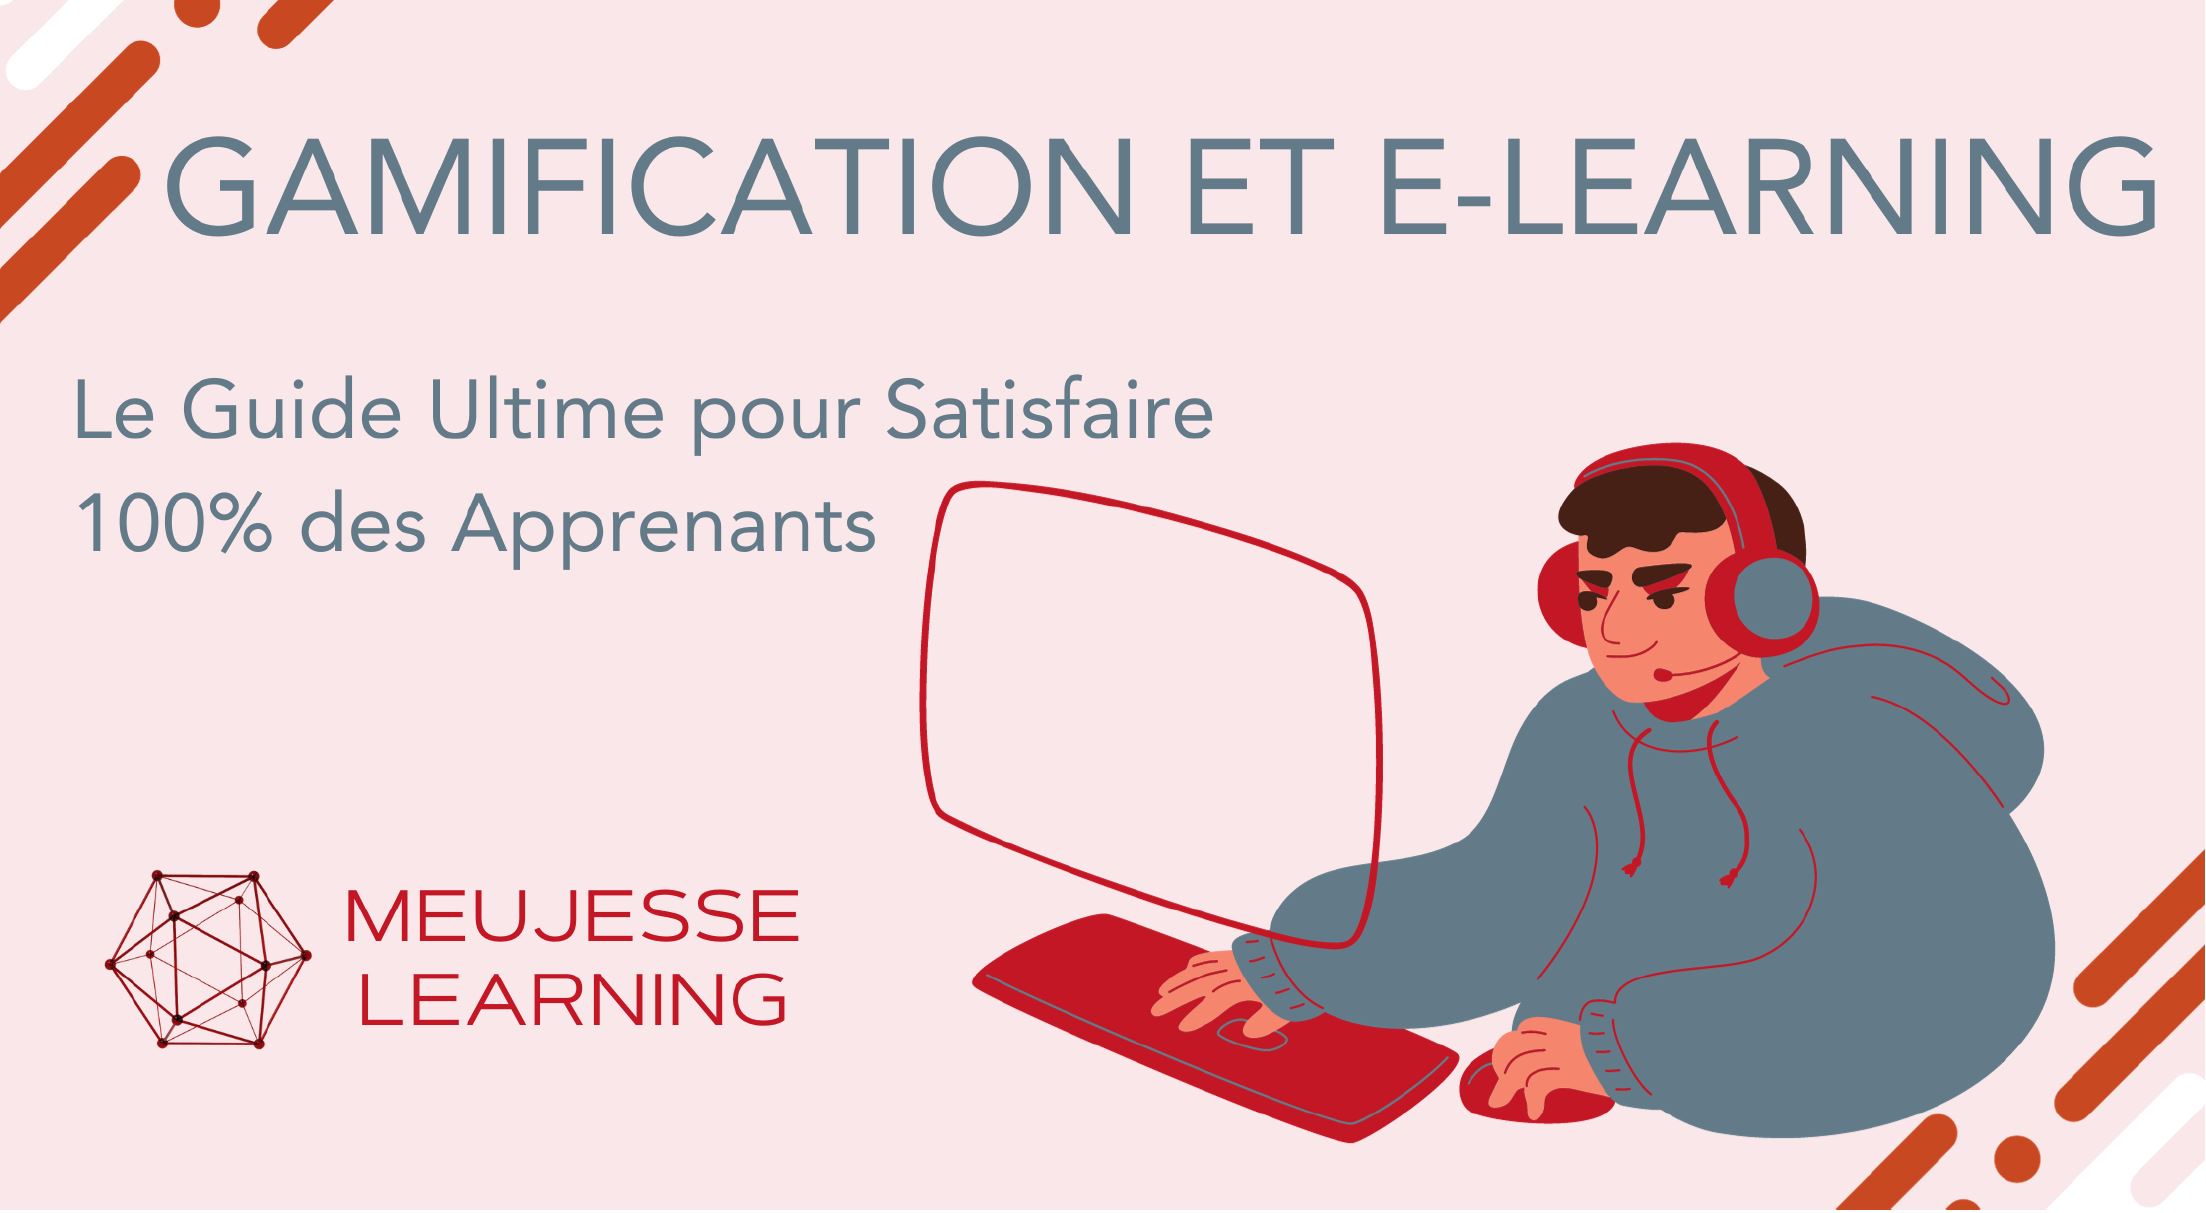 Gamification et E-Learning